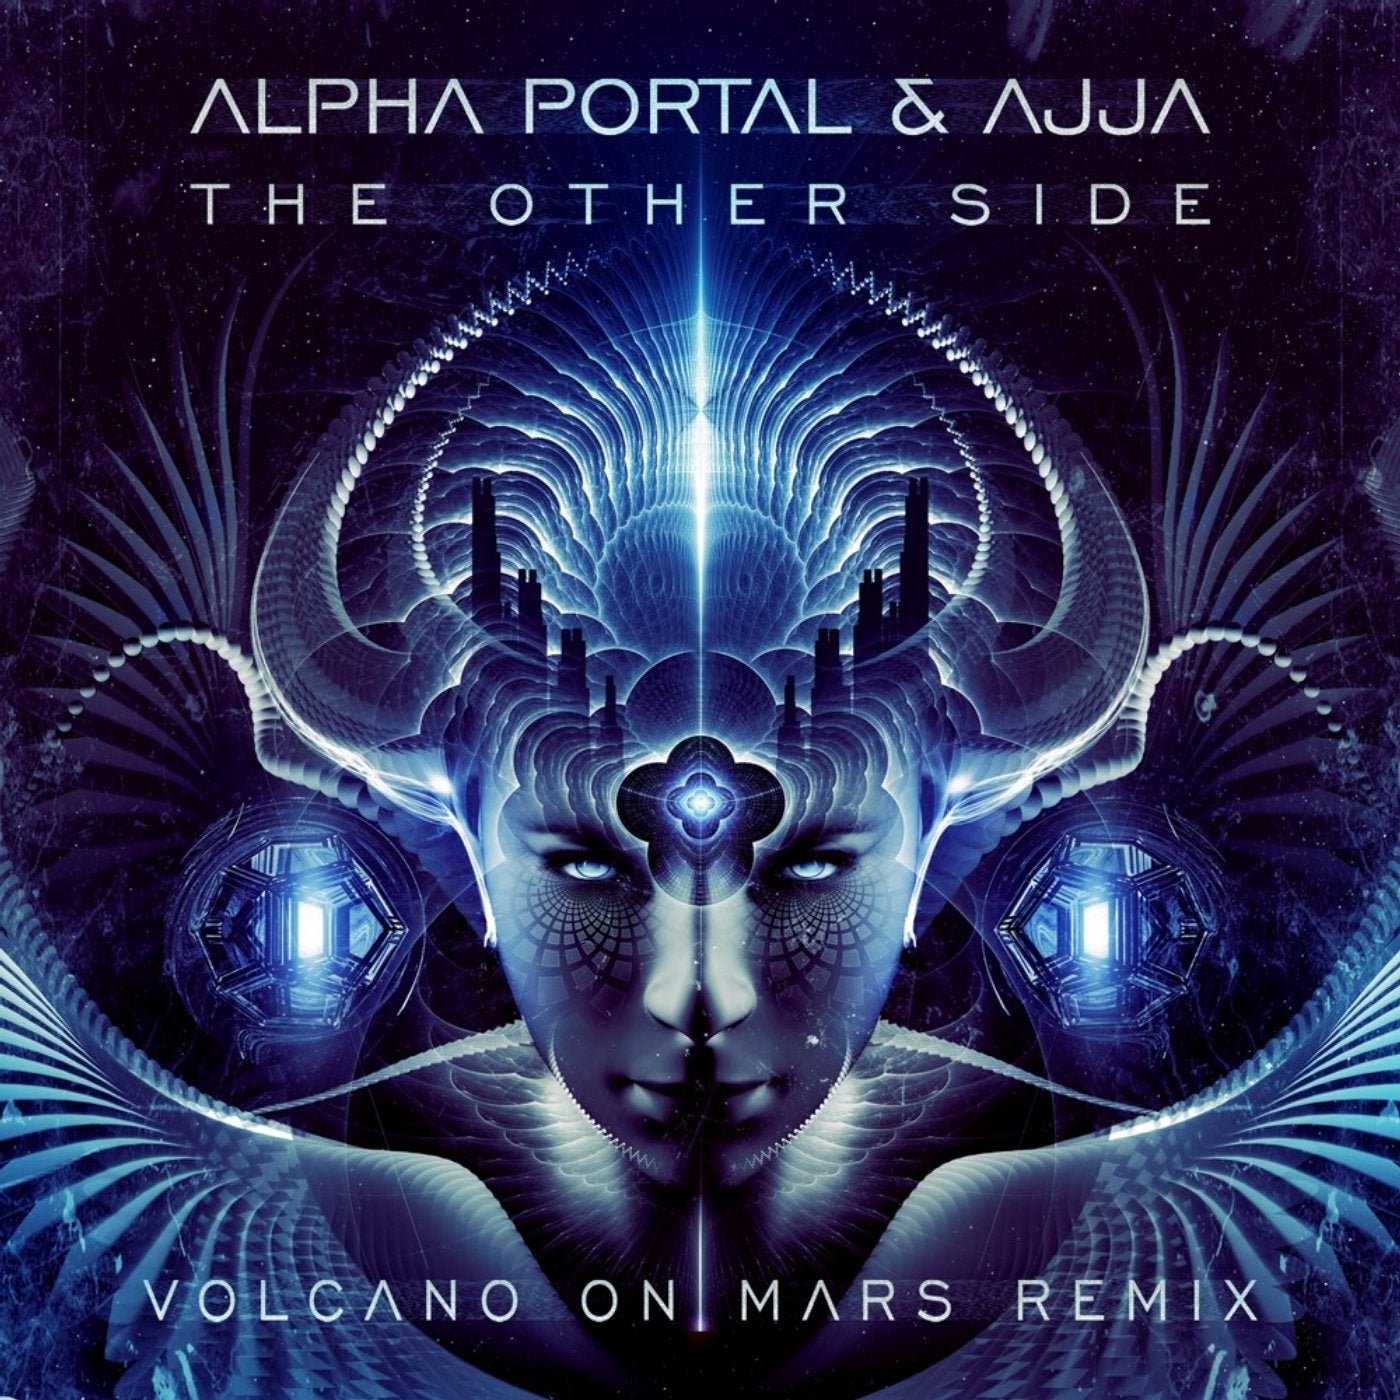 The Other Side (Volcano on Mars Remix)